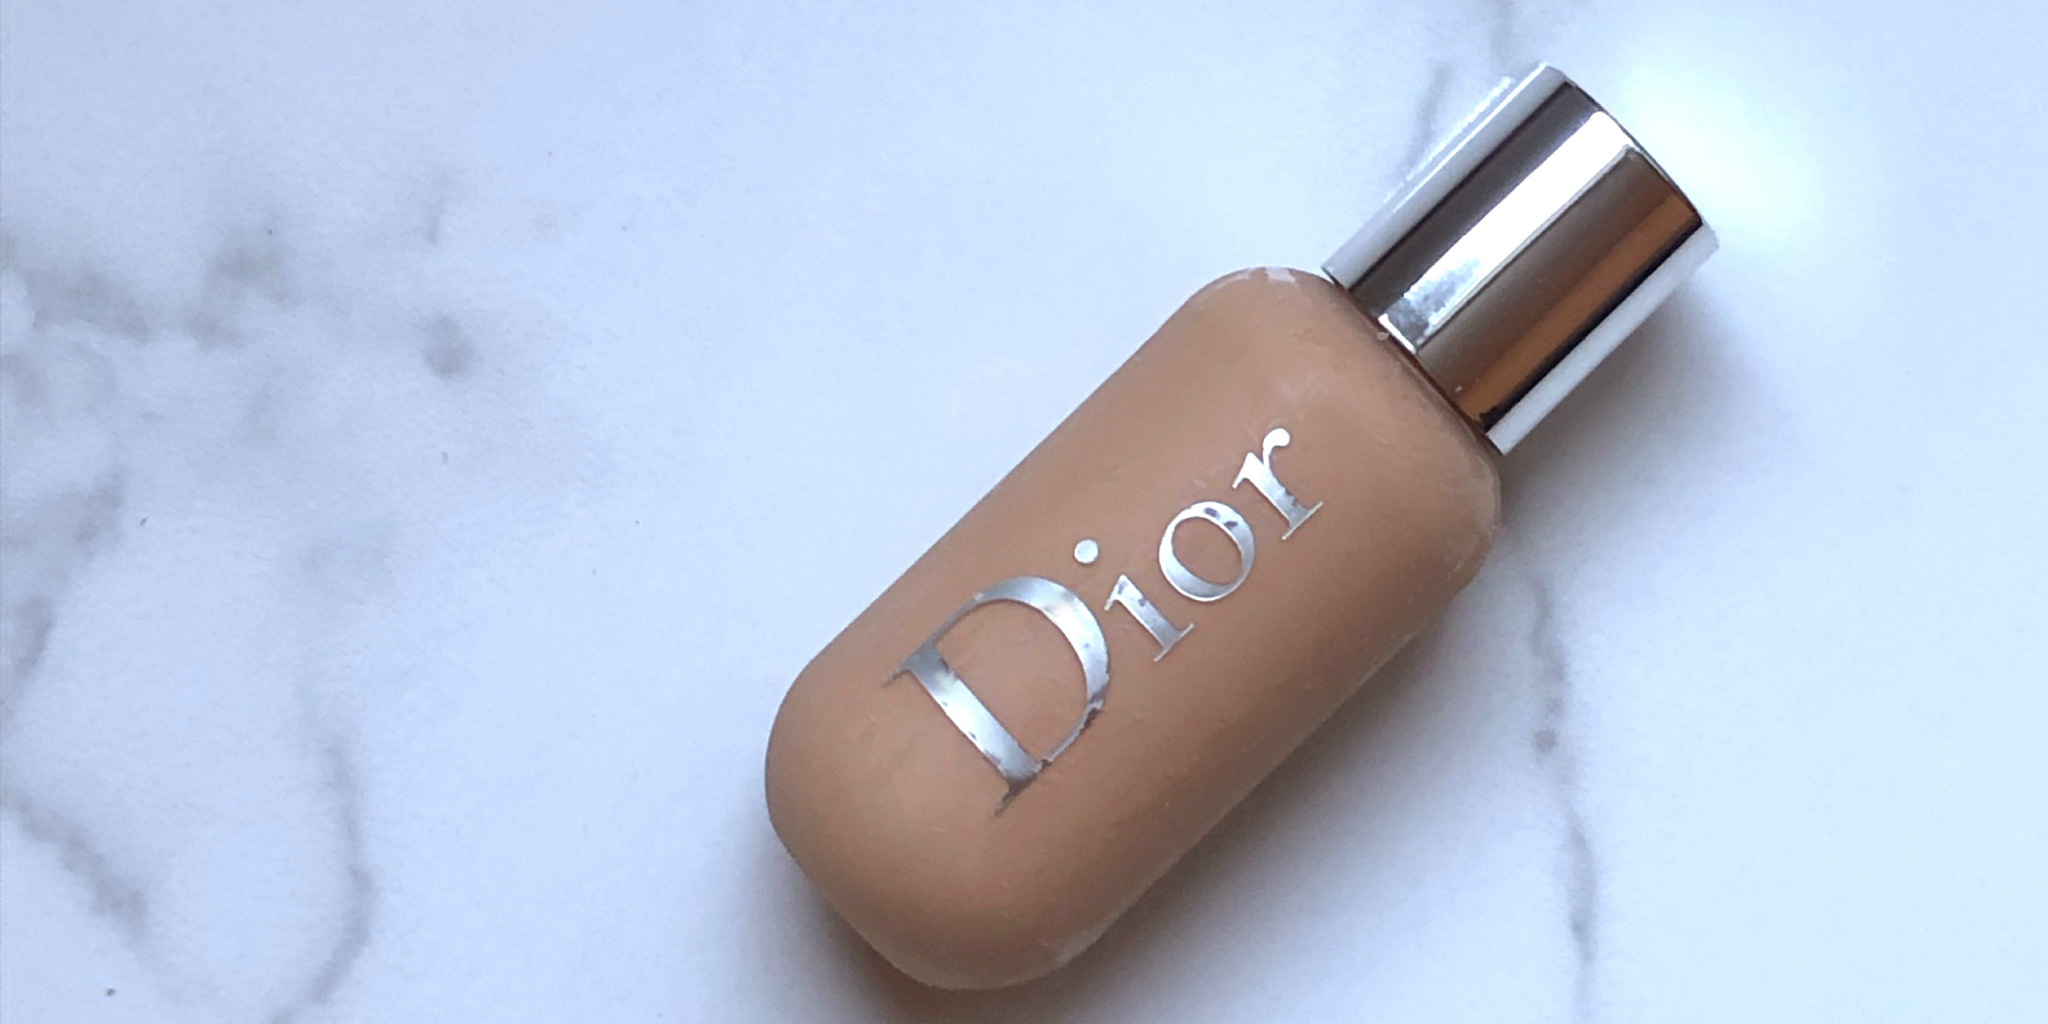 dior face and body foundation makeupalley